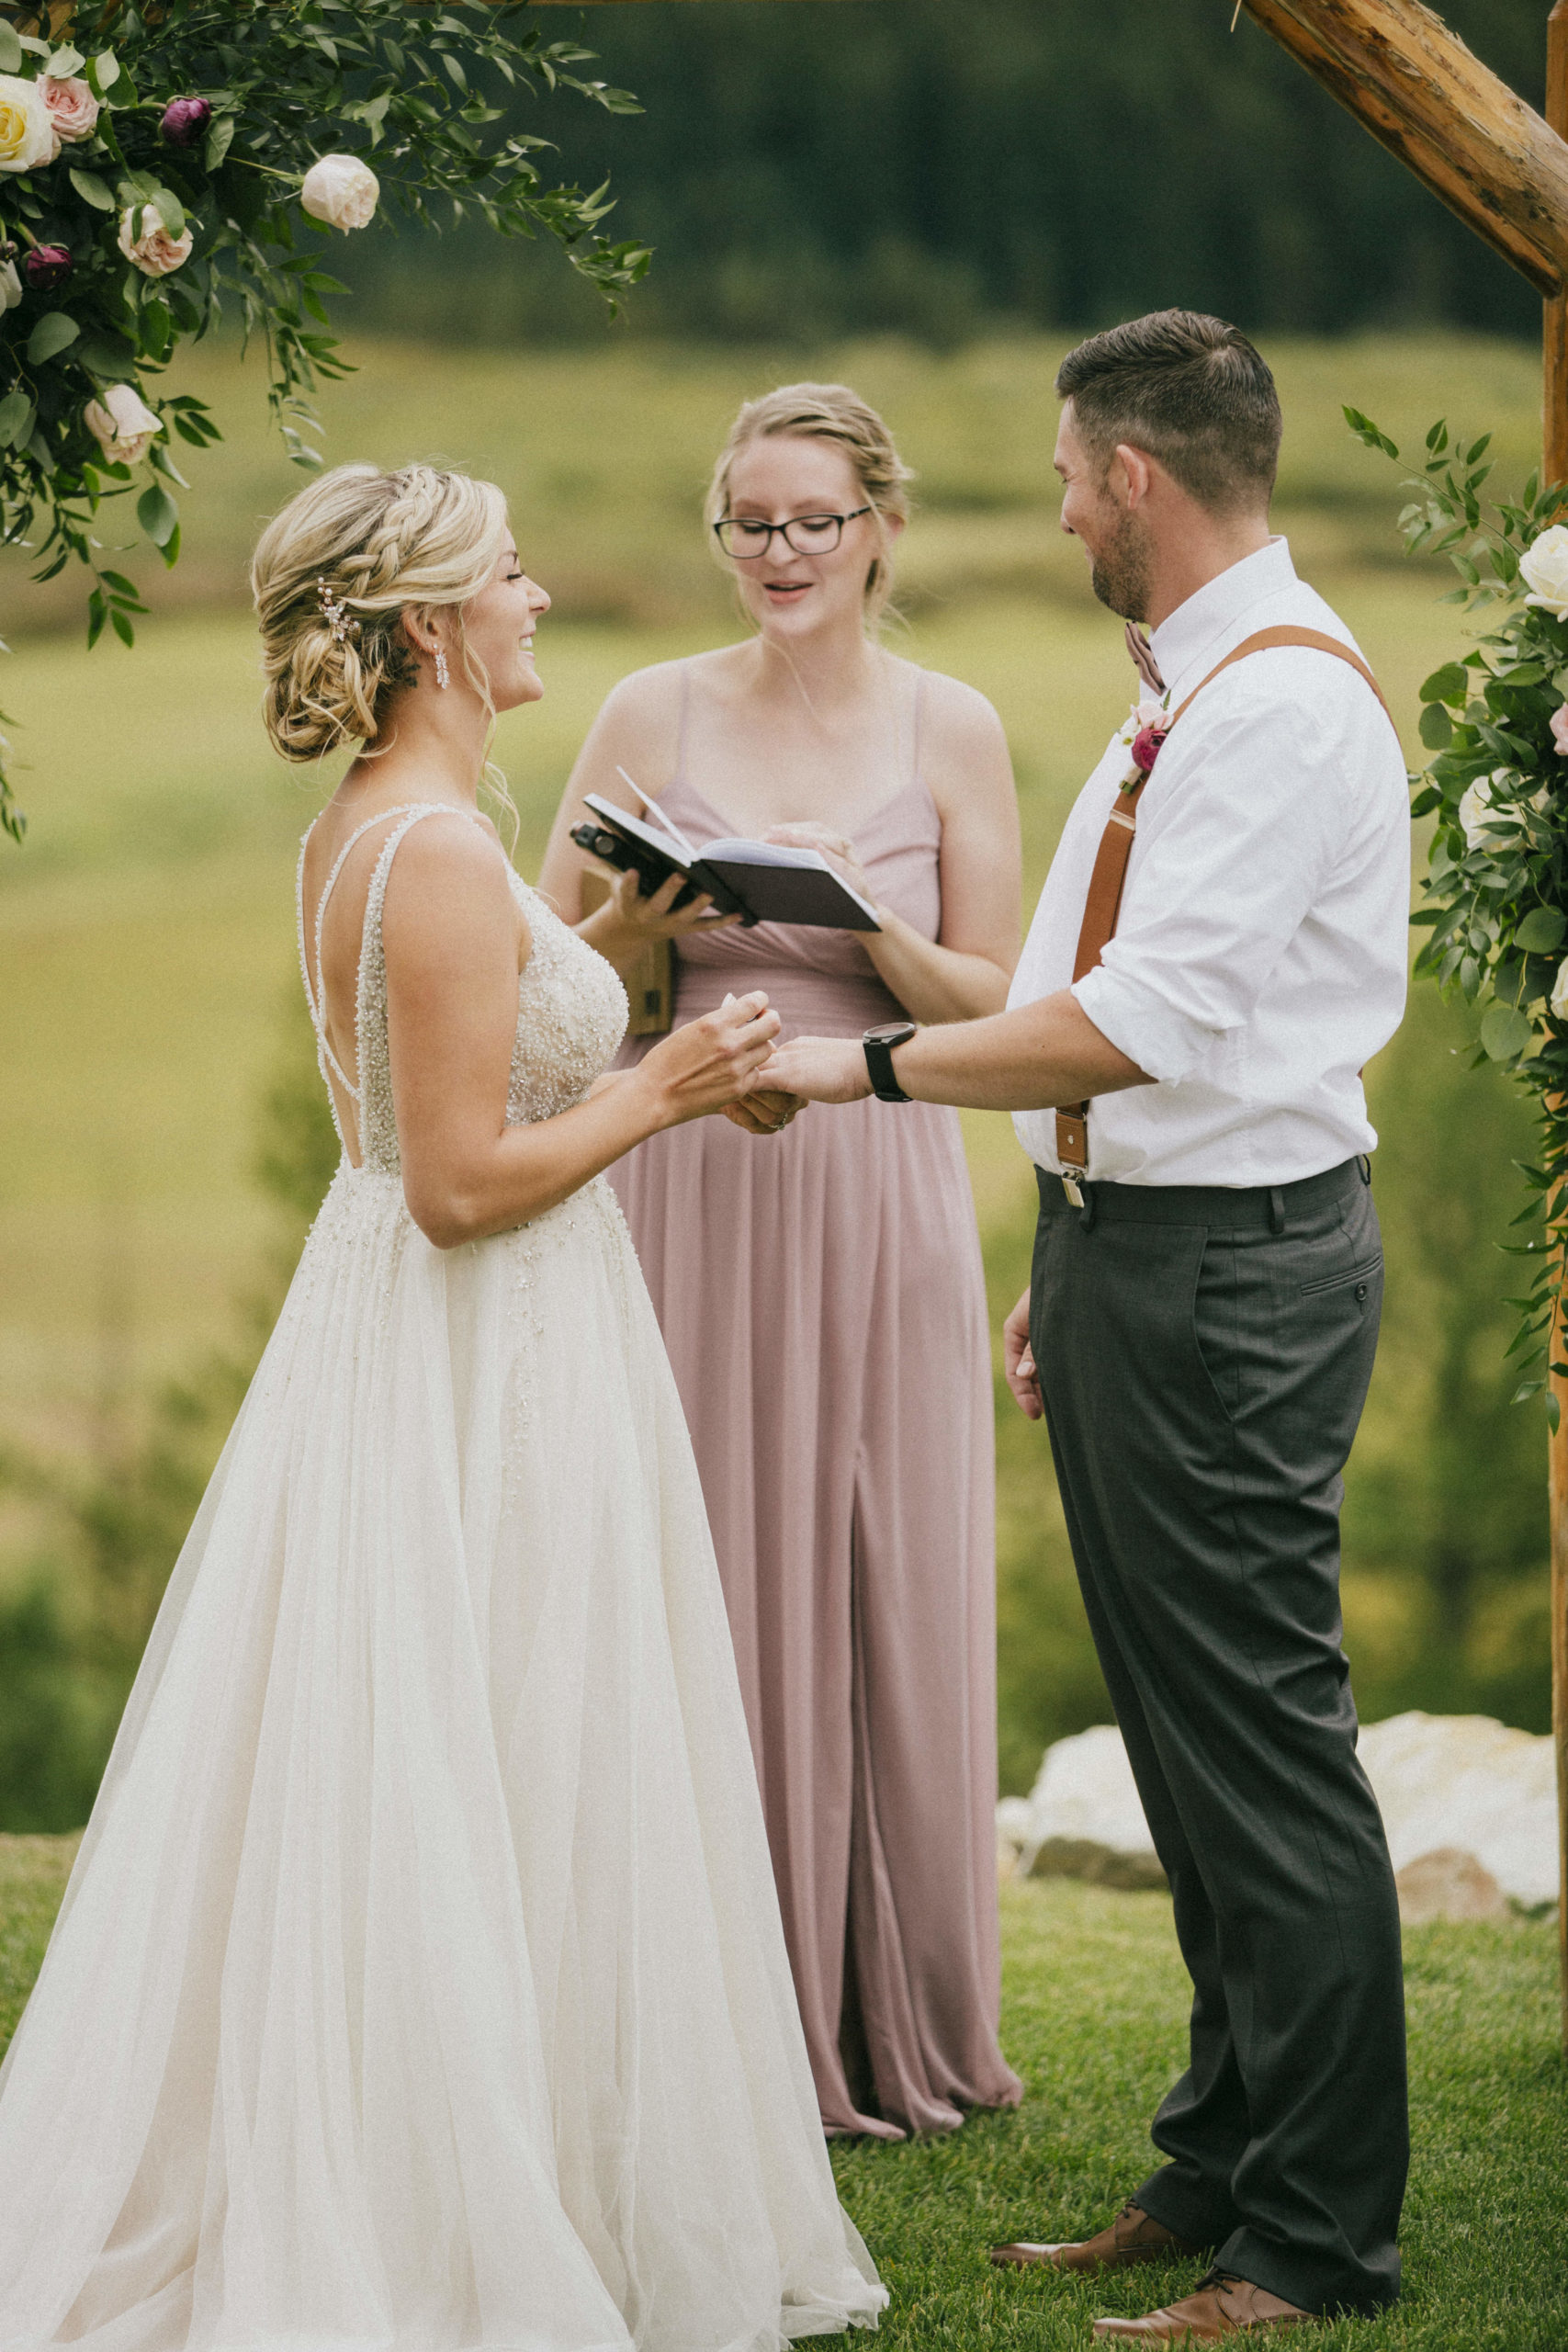 Bride, groom, and officiant at ranch wedding ceremony